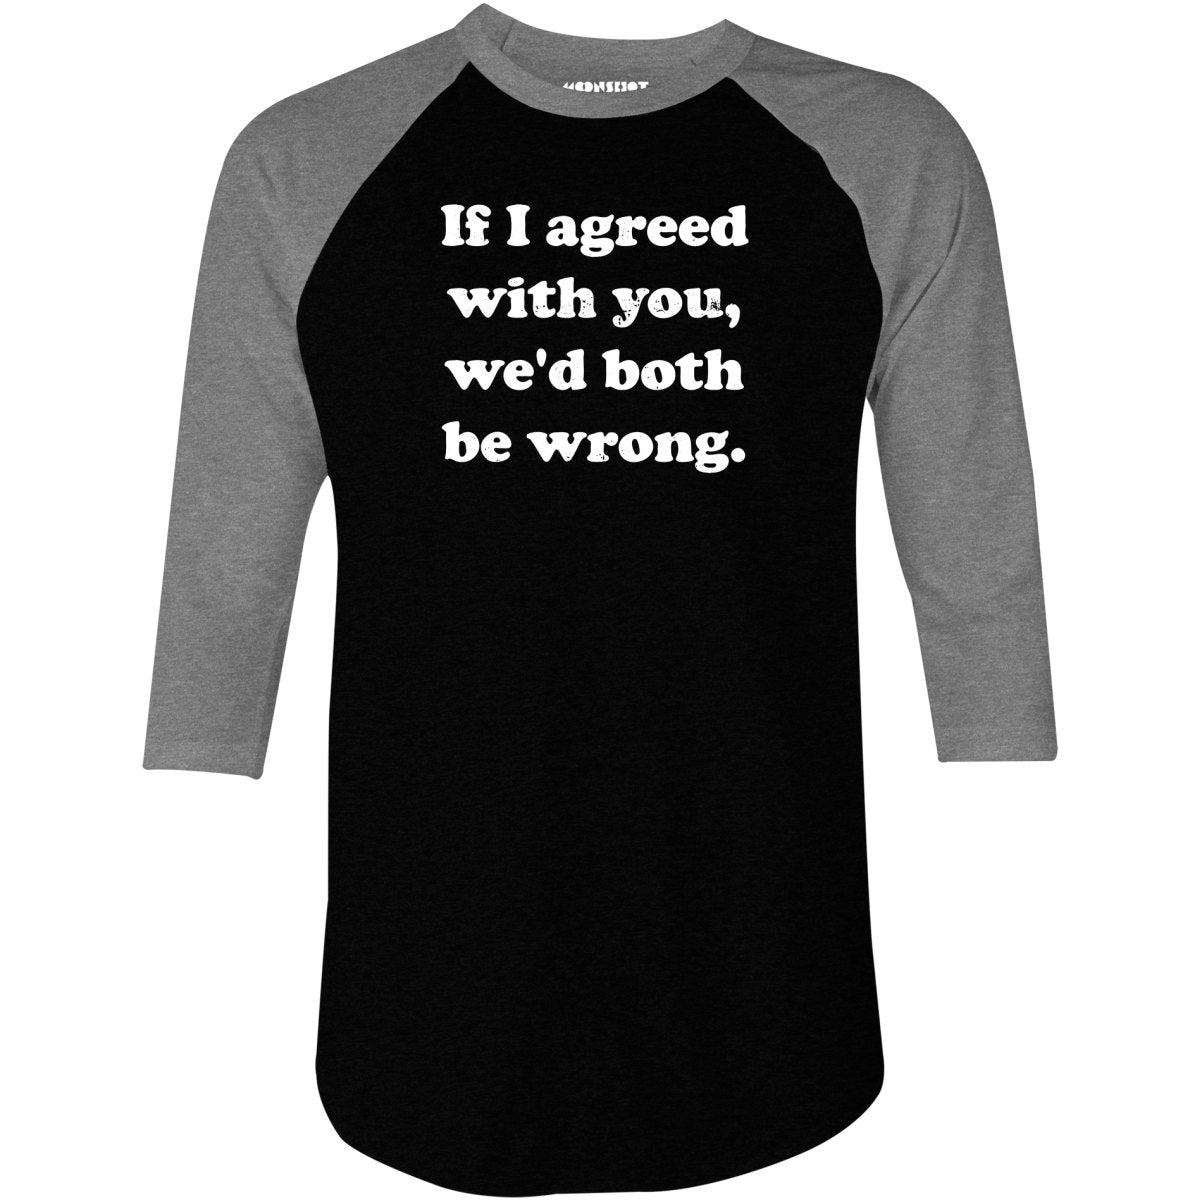 If I Agreed With You, We'd Both Be Wrong - 3/4 Sleeve Raglan T-Shirt